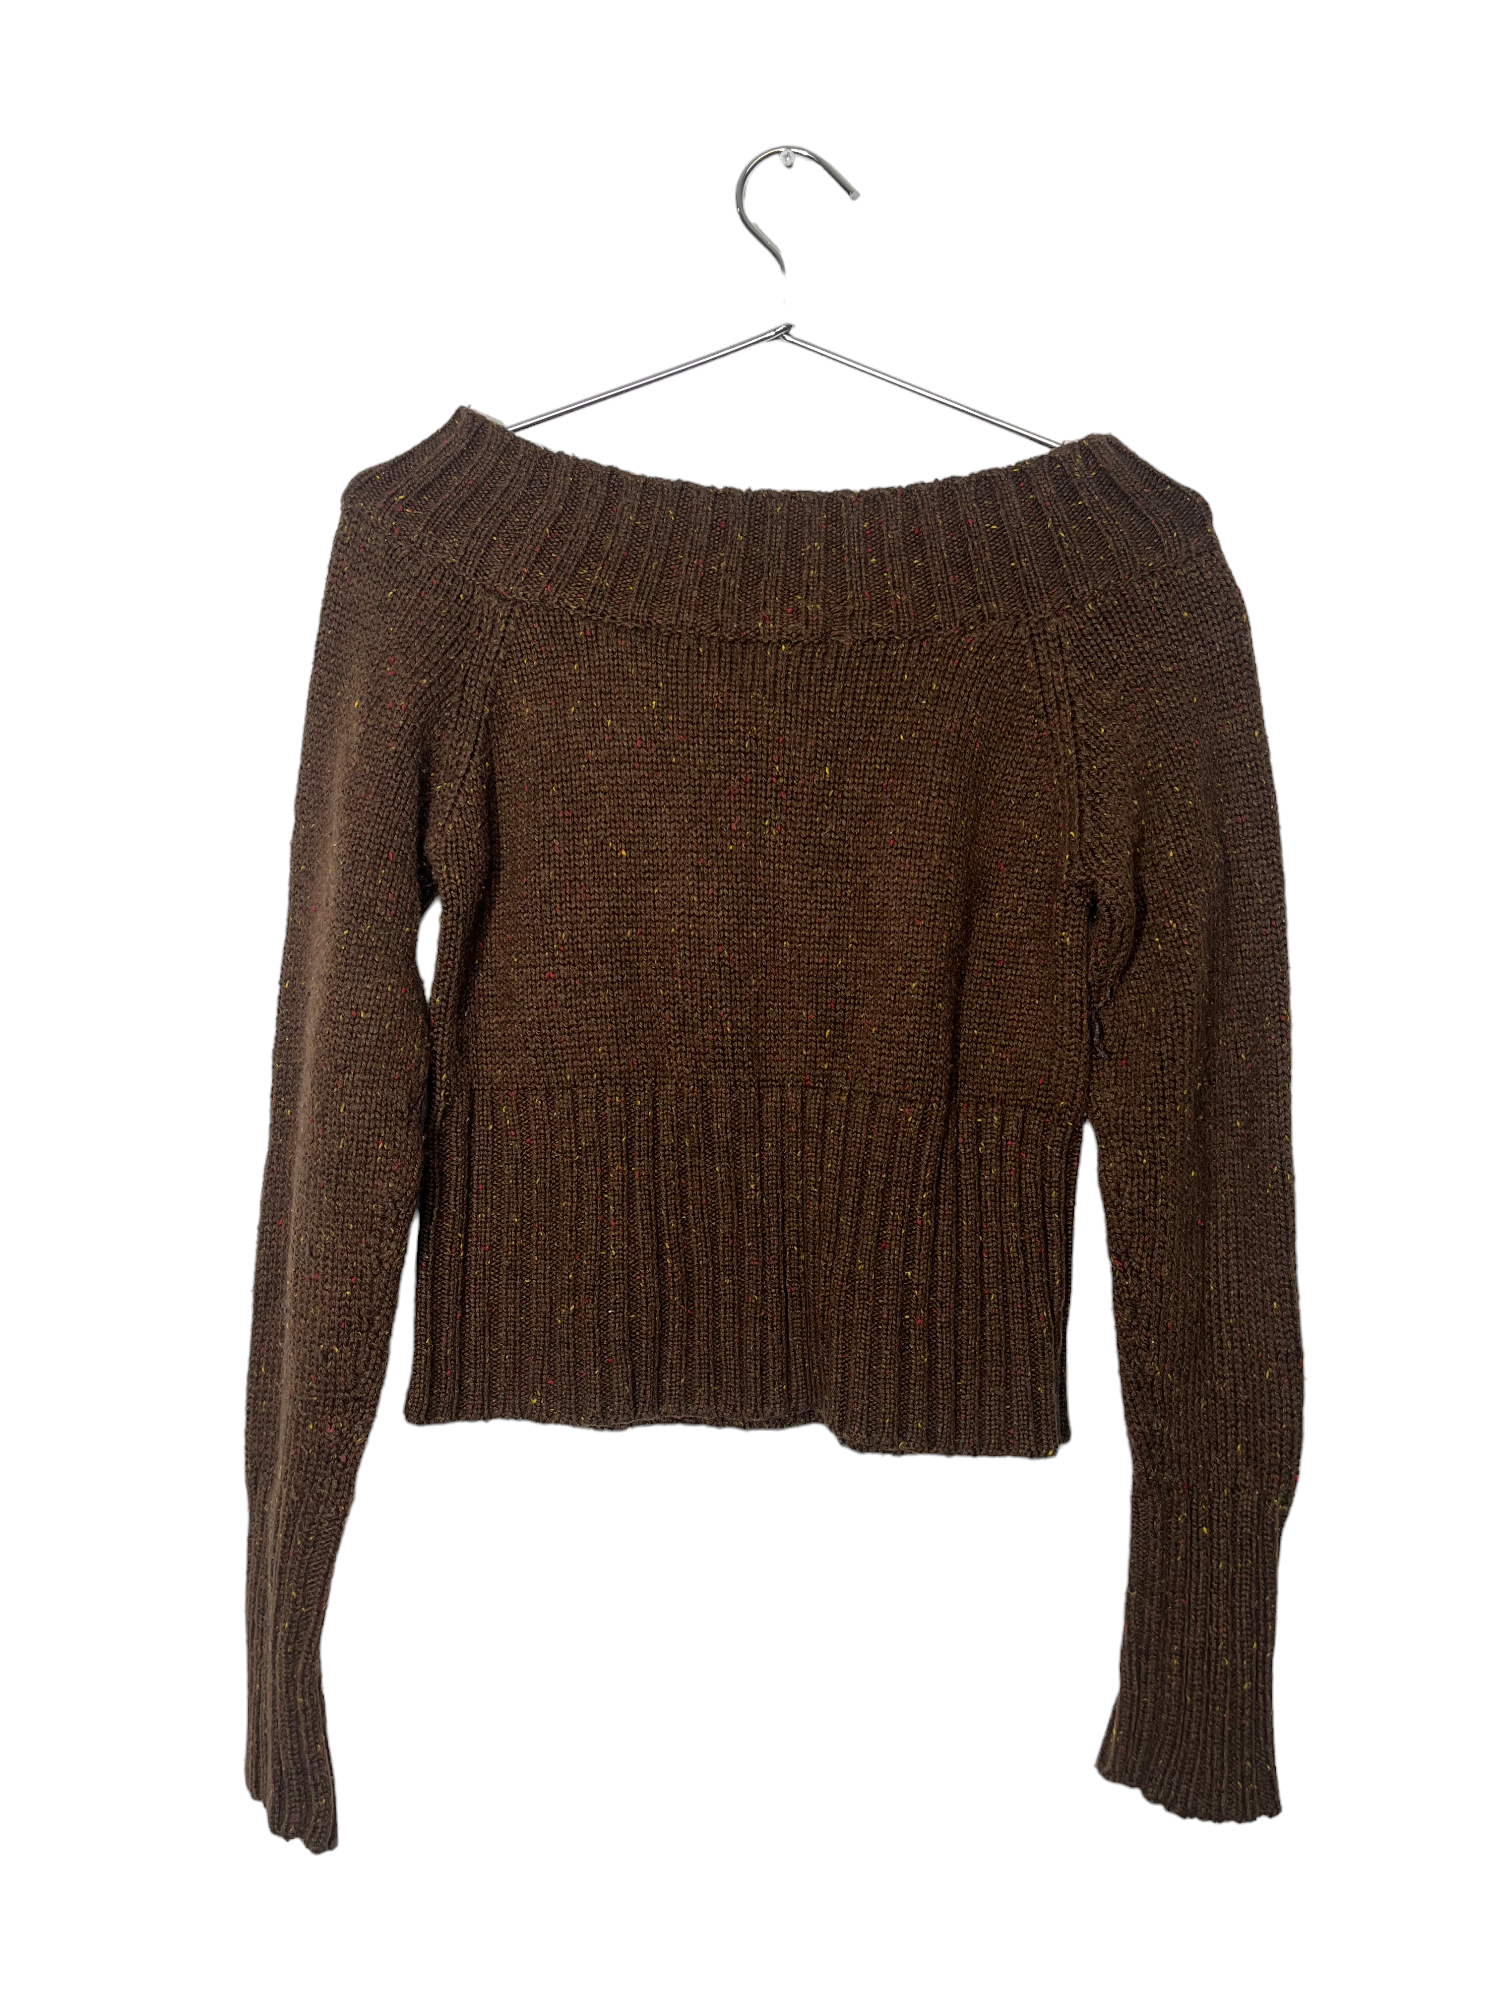 Off the Shoulder Brown Knitted Sweater Top